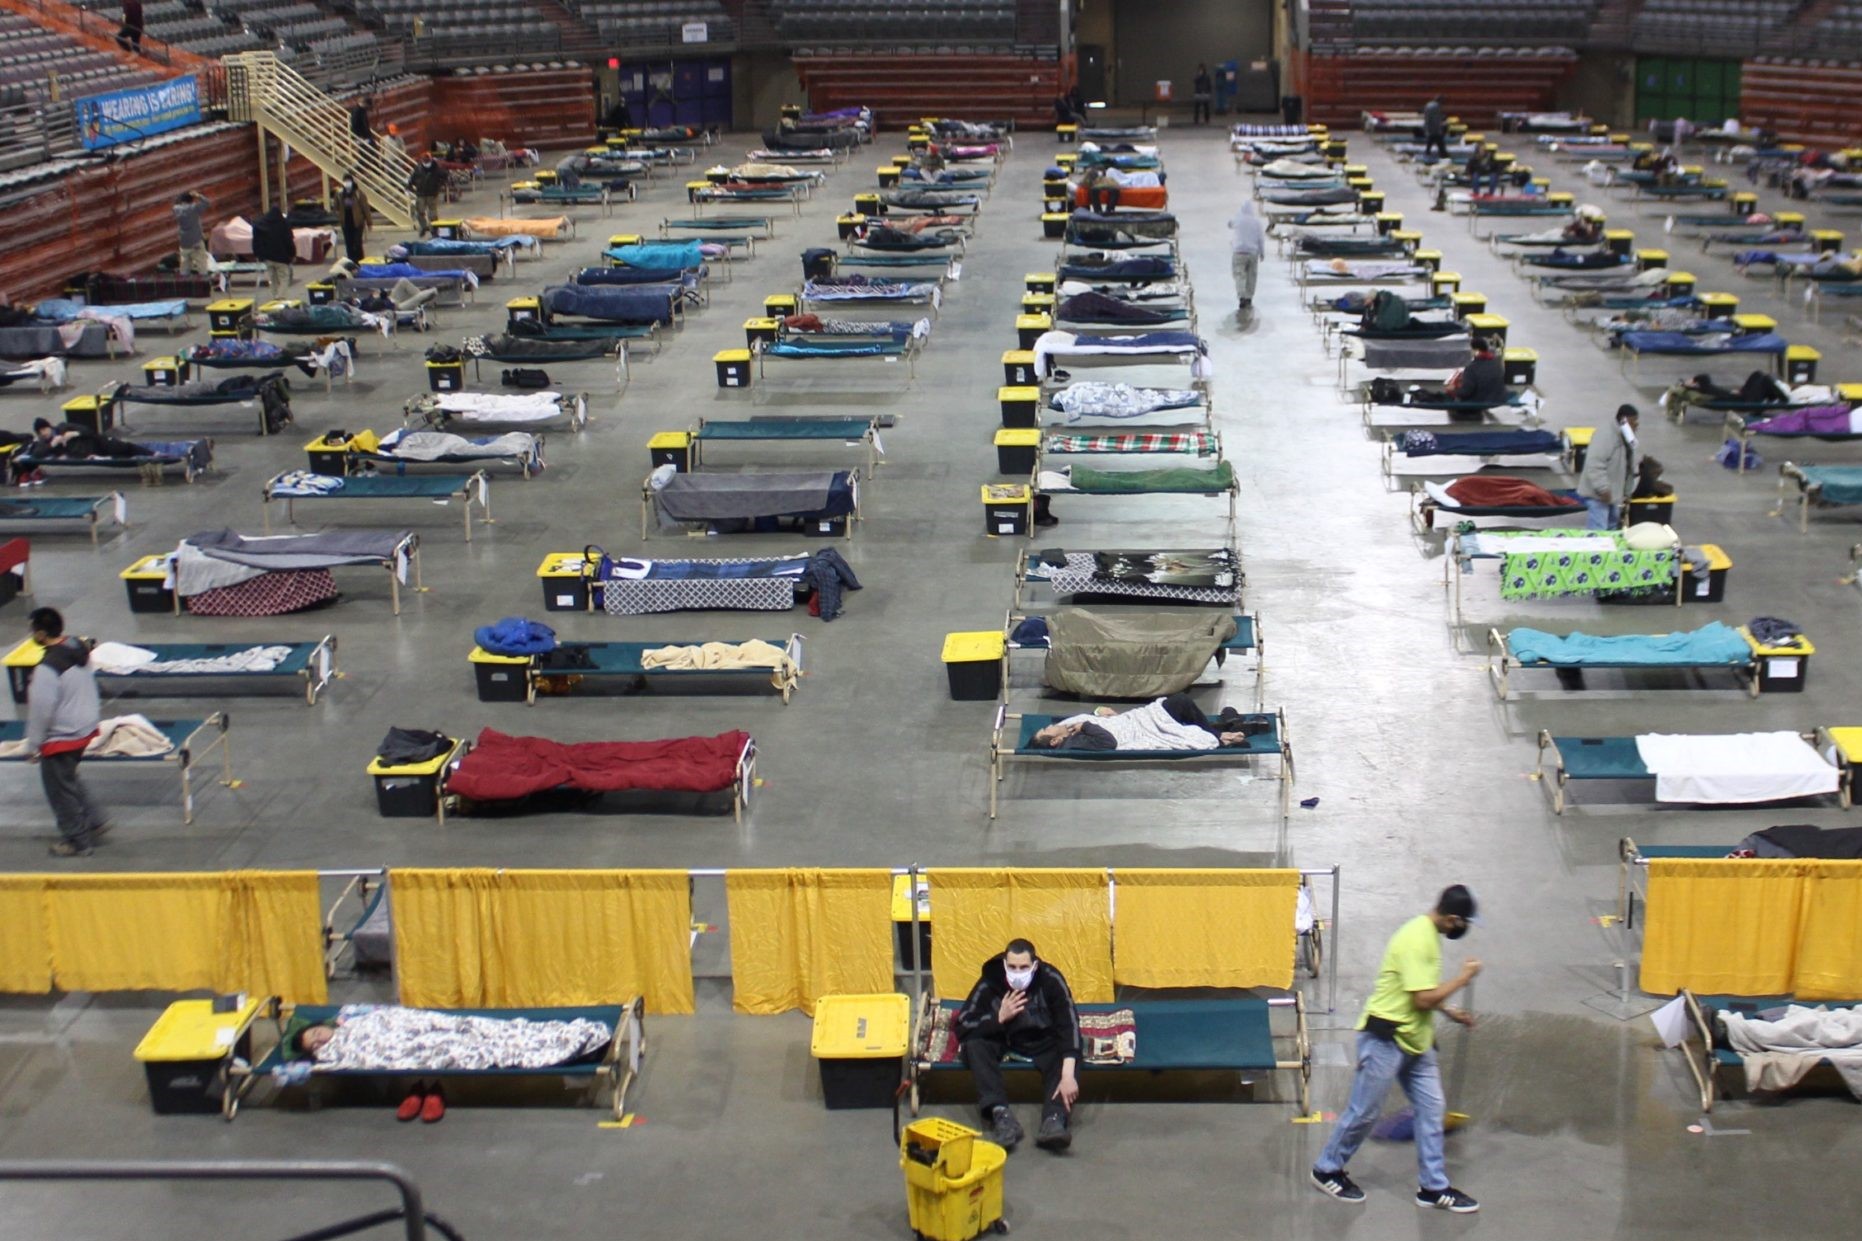 cots spread across a shelter